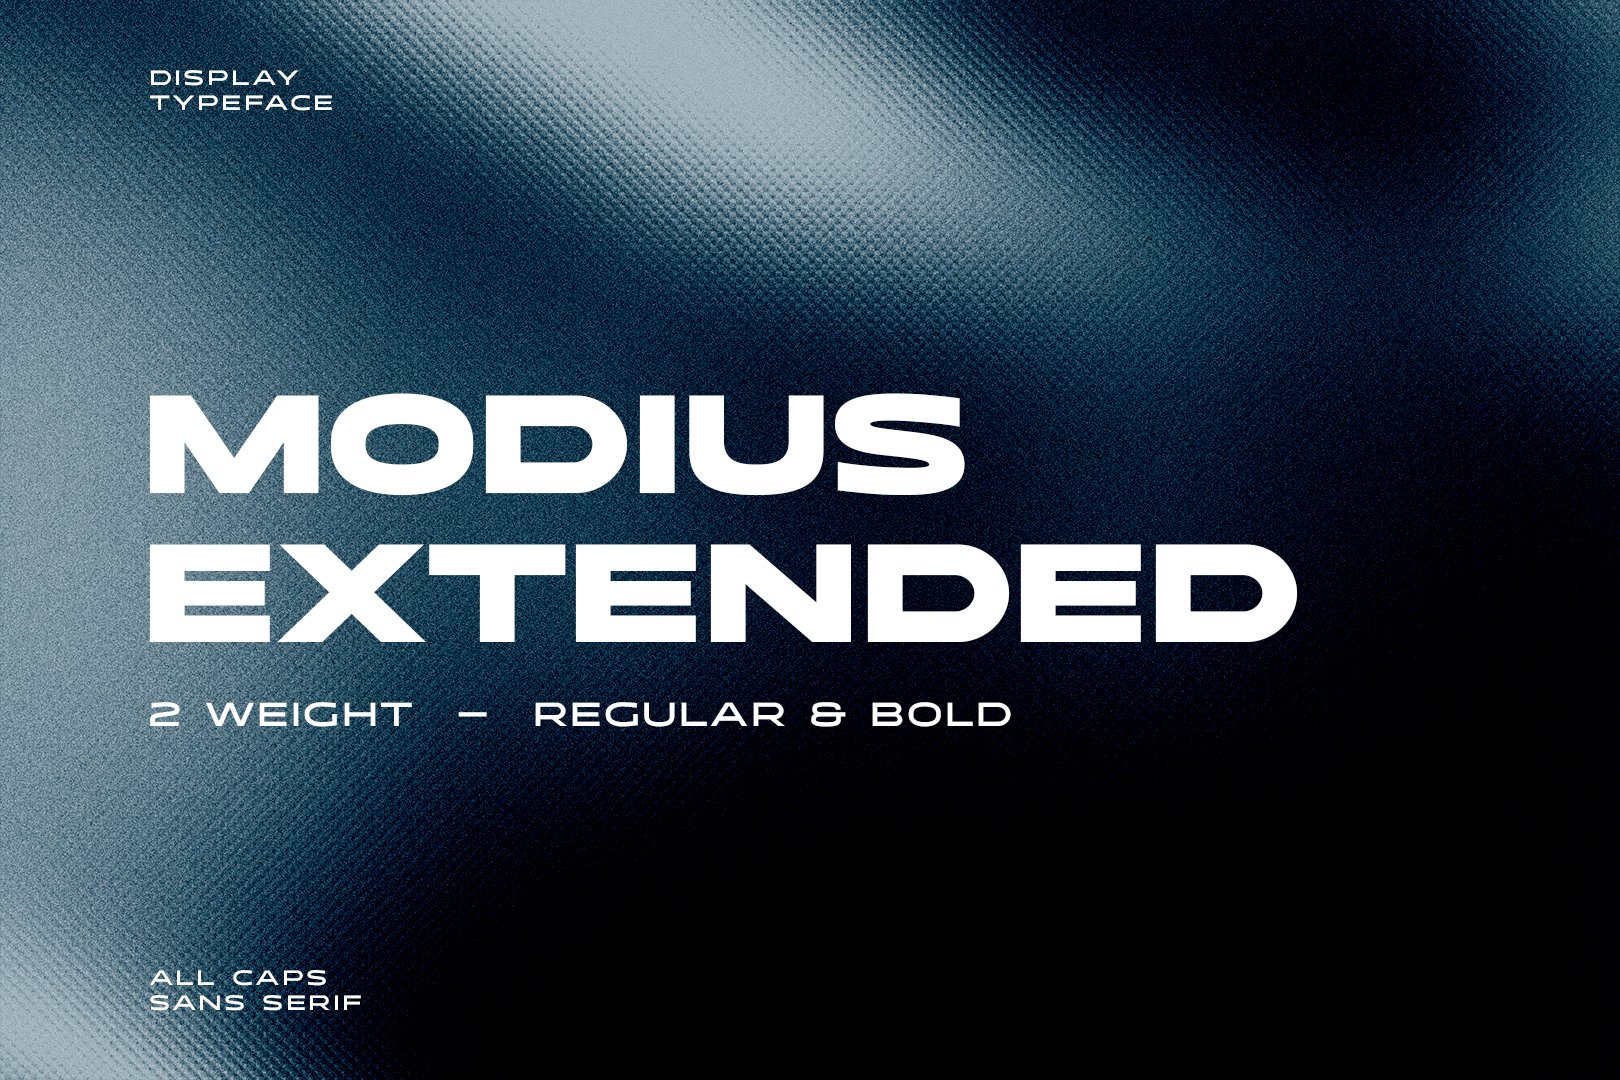 Modius Extended cover image.